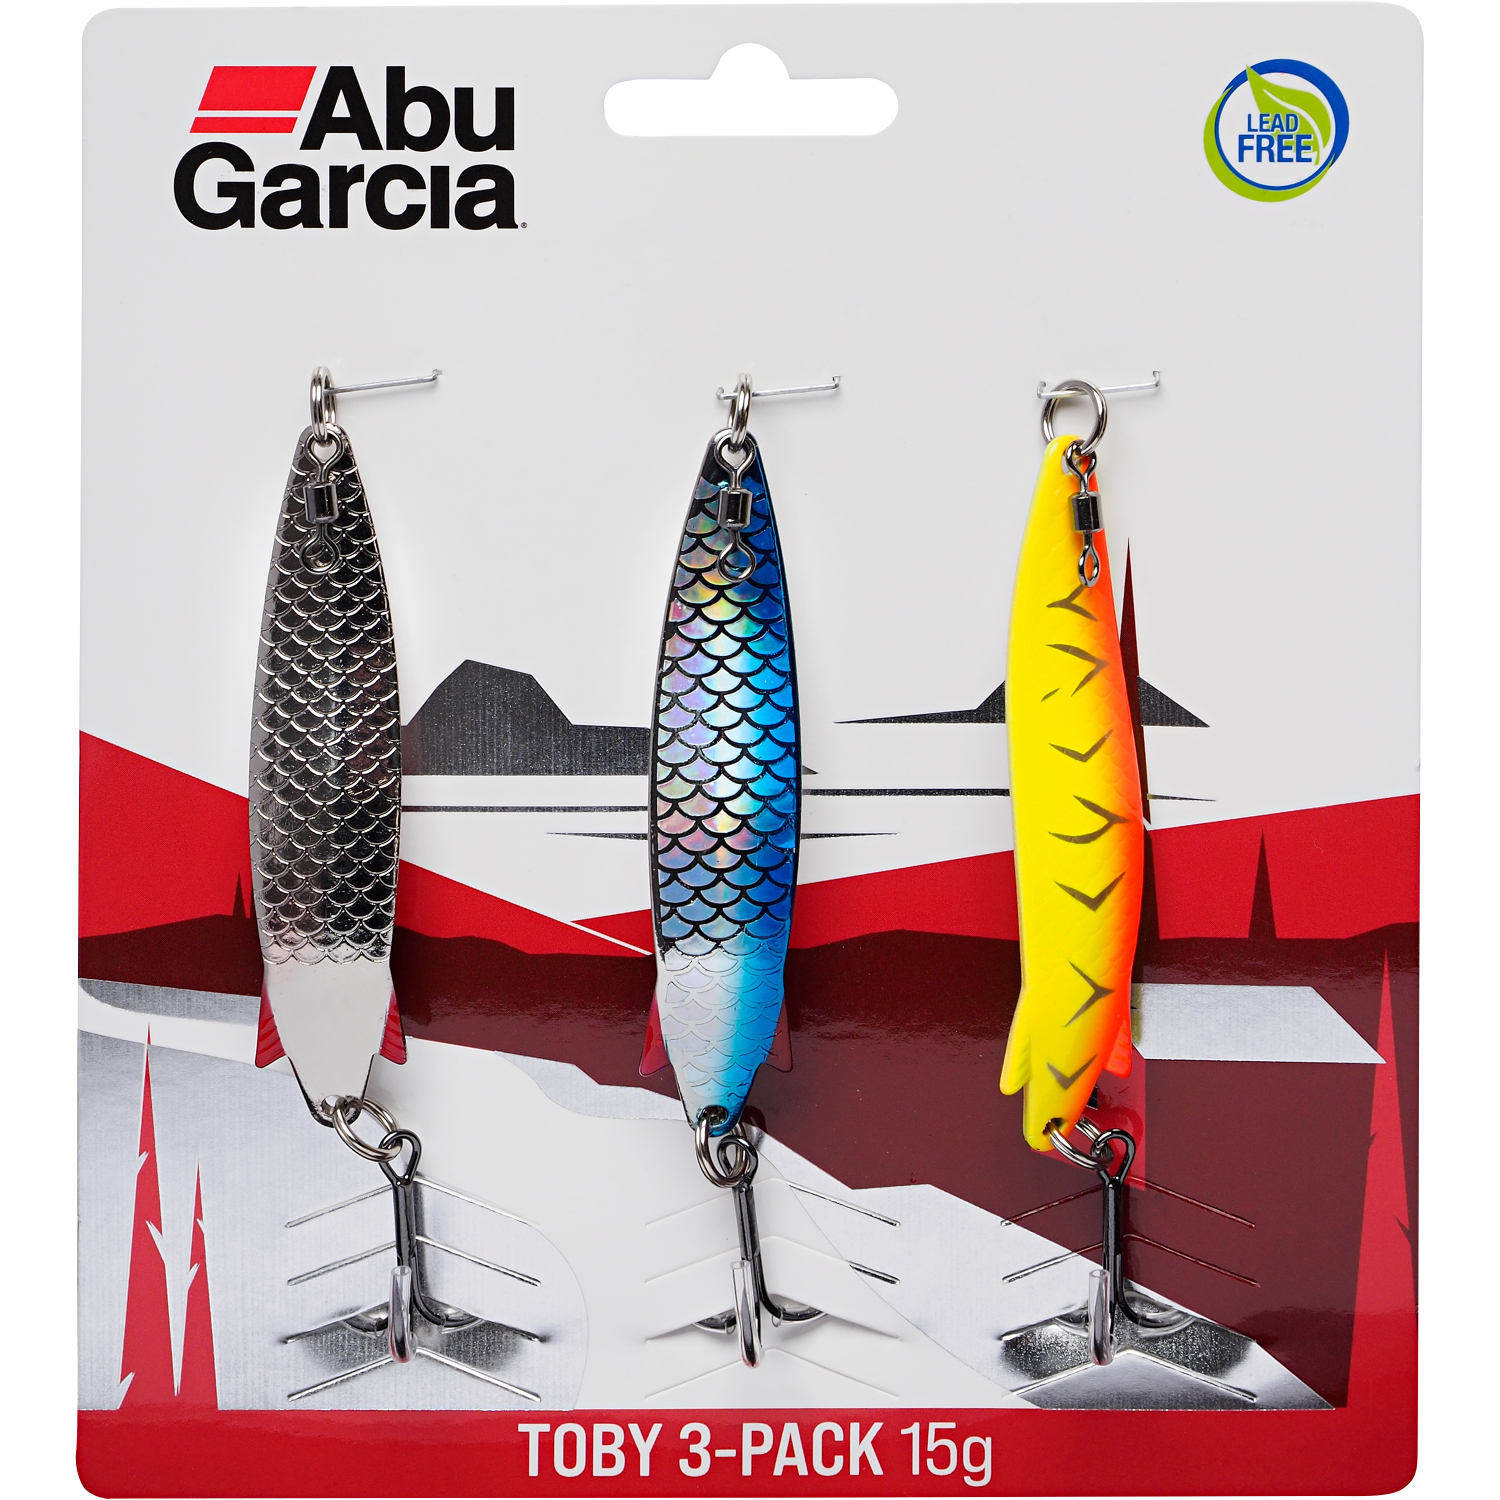 Abu Garcia Spoon Toby 3 Pack at low prices